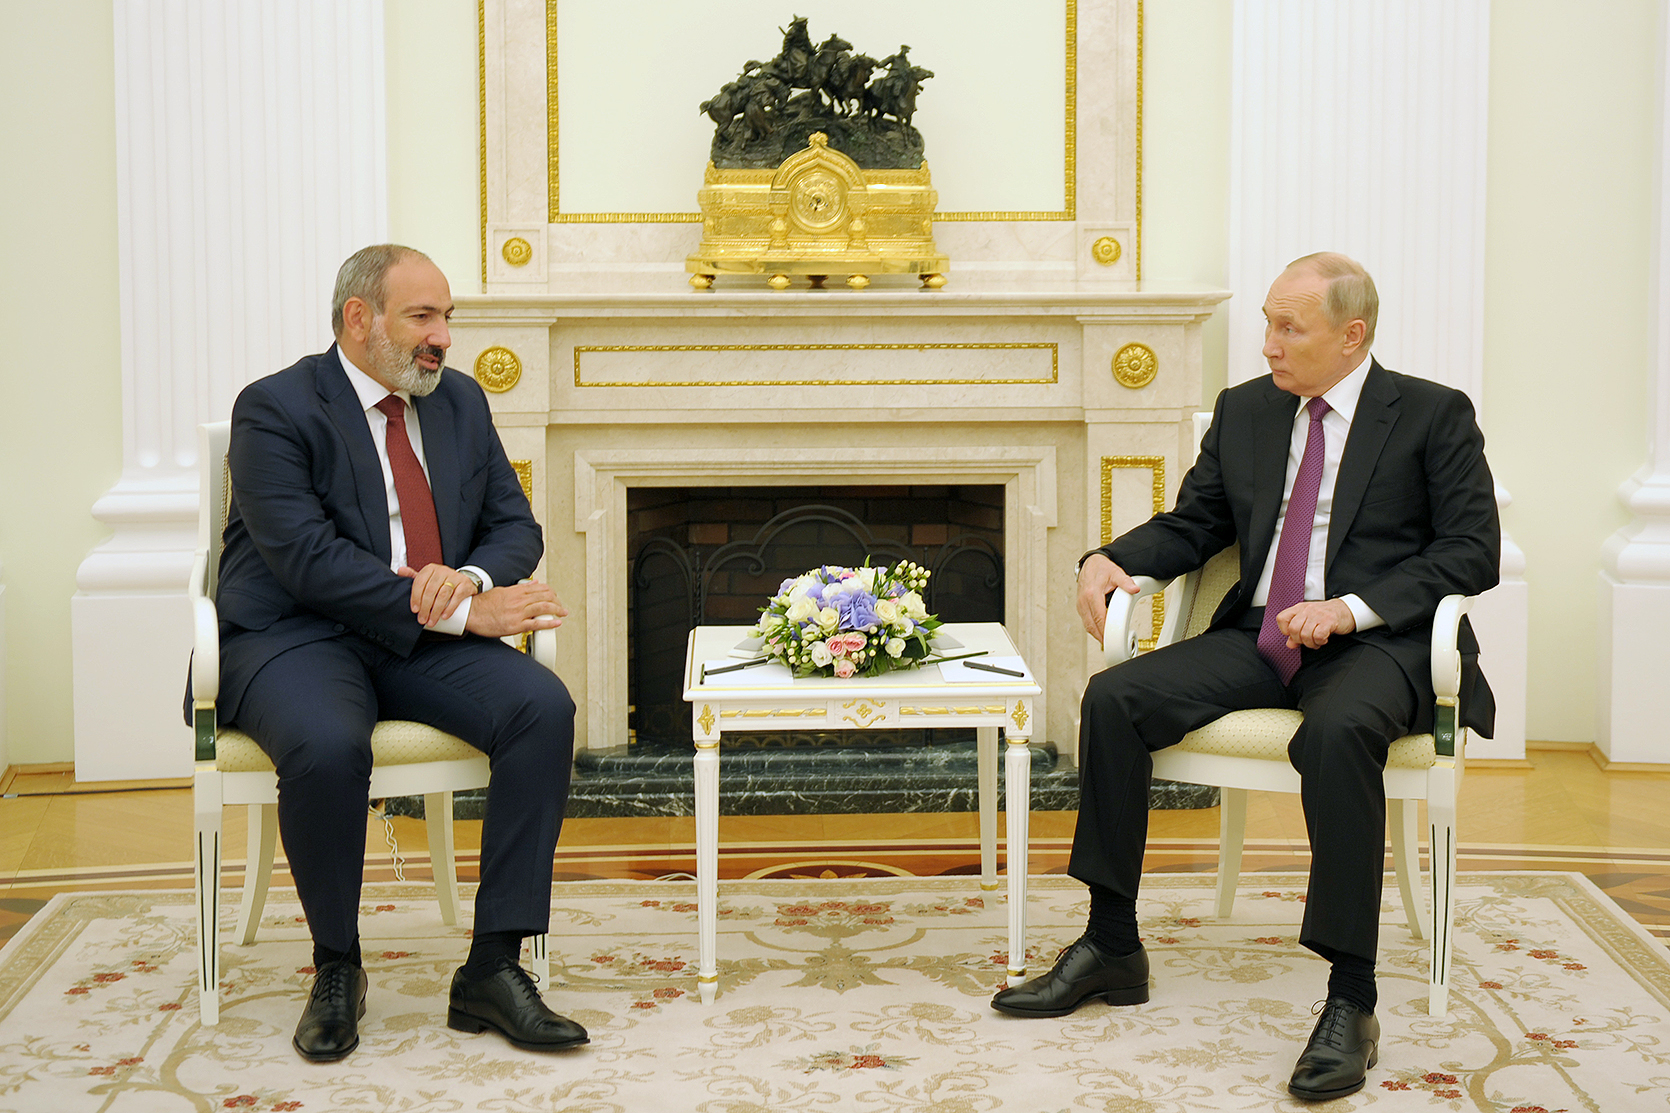 Pashinyan’s Foreign Policy Challenges